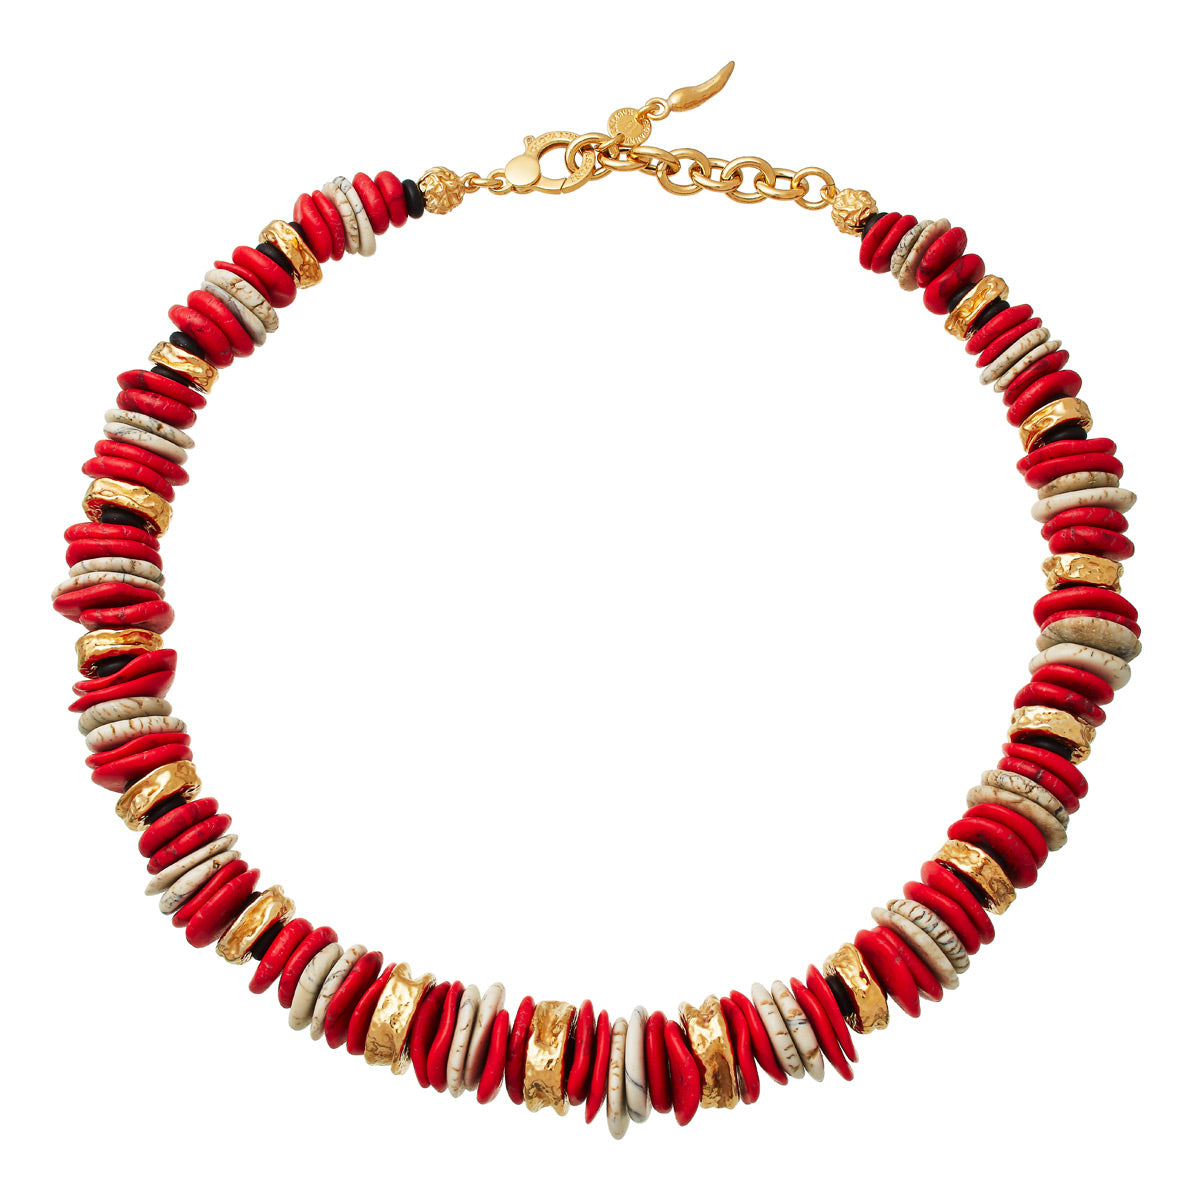 Giovanni Raspini Bali Necklace Gold Plated Silver with Madrepora Coral and Red Jasper